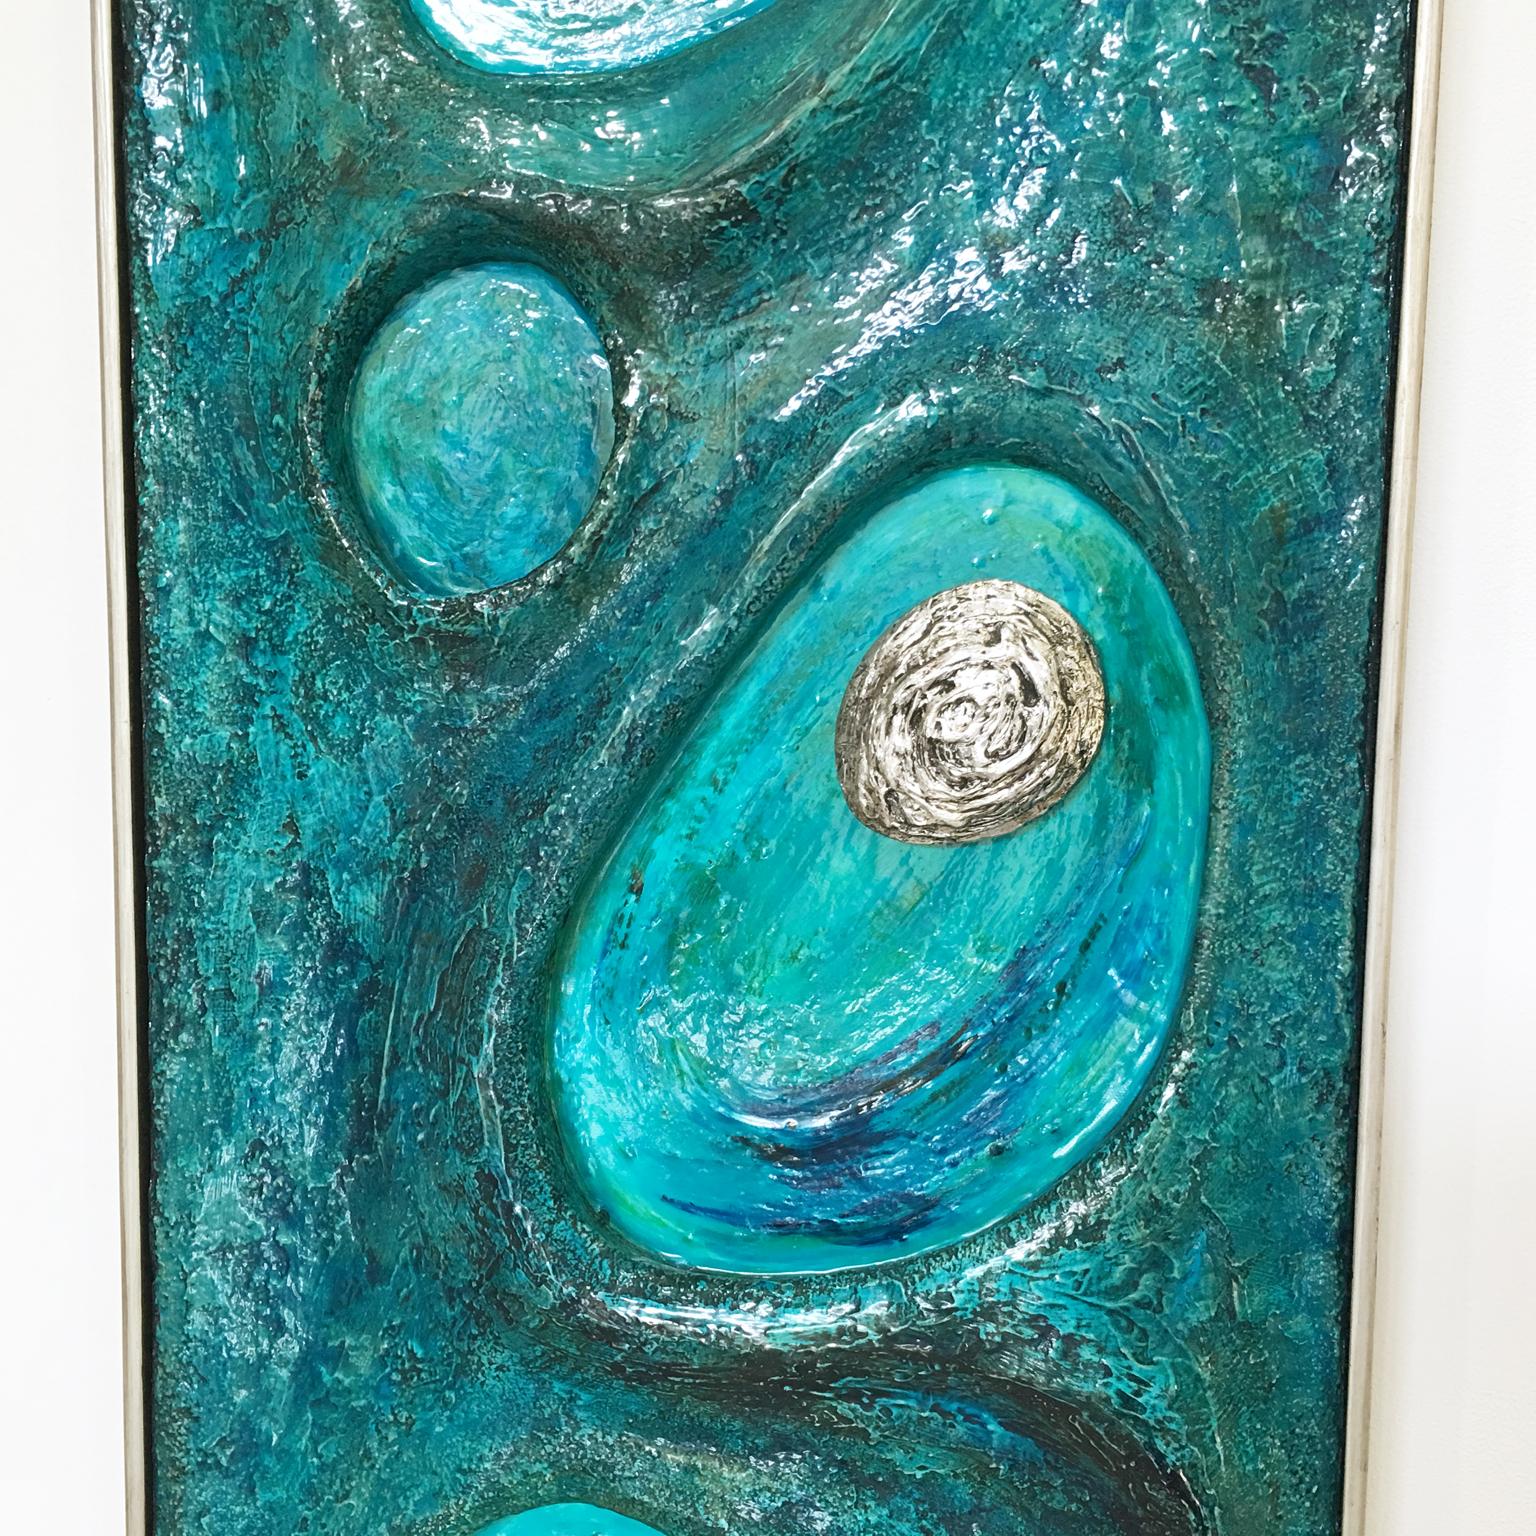 Psychedelic Turquoise Acrylic Resin Art Wall Sculpture Panel by Lorraine Stelzer For Sale 6